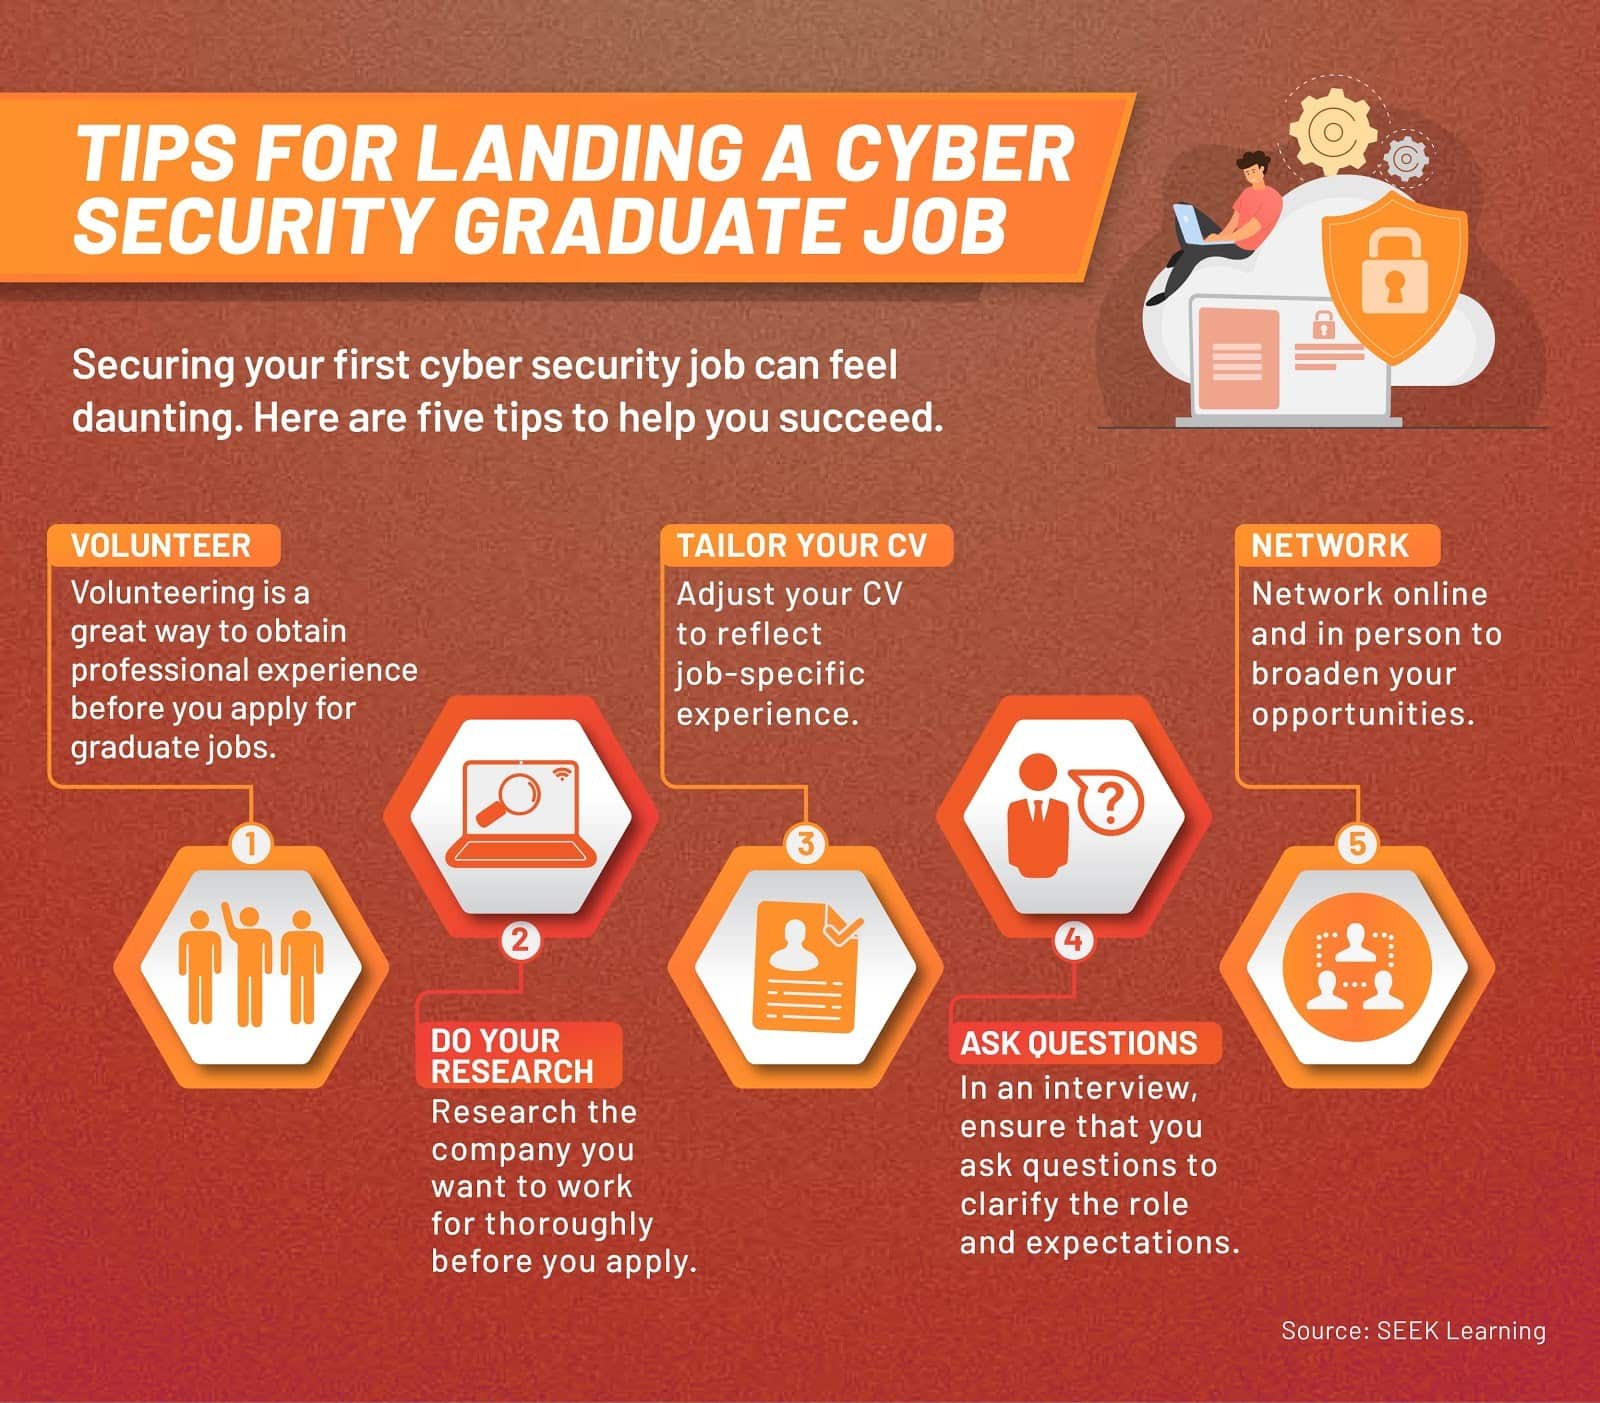 A list of five tips to get a graduate job in cyber security.